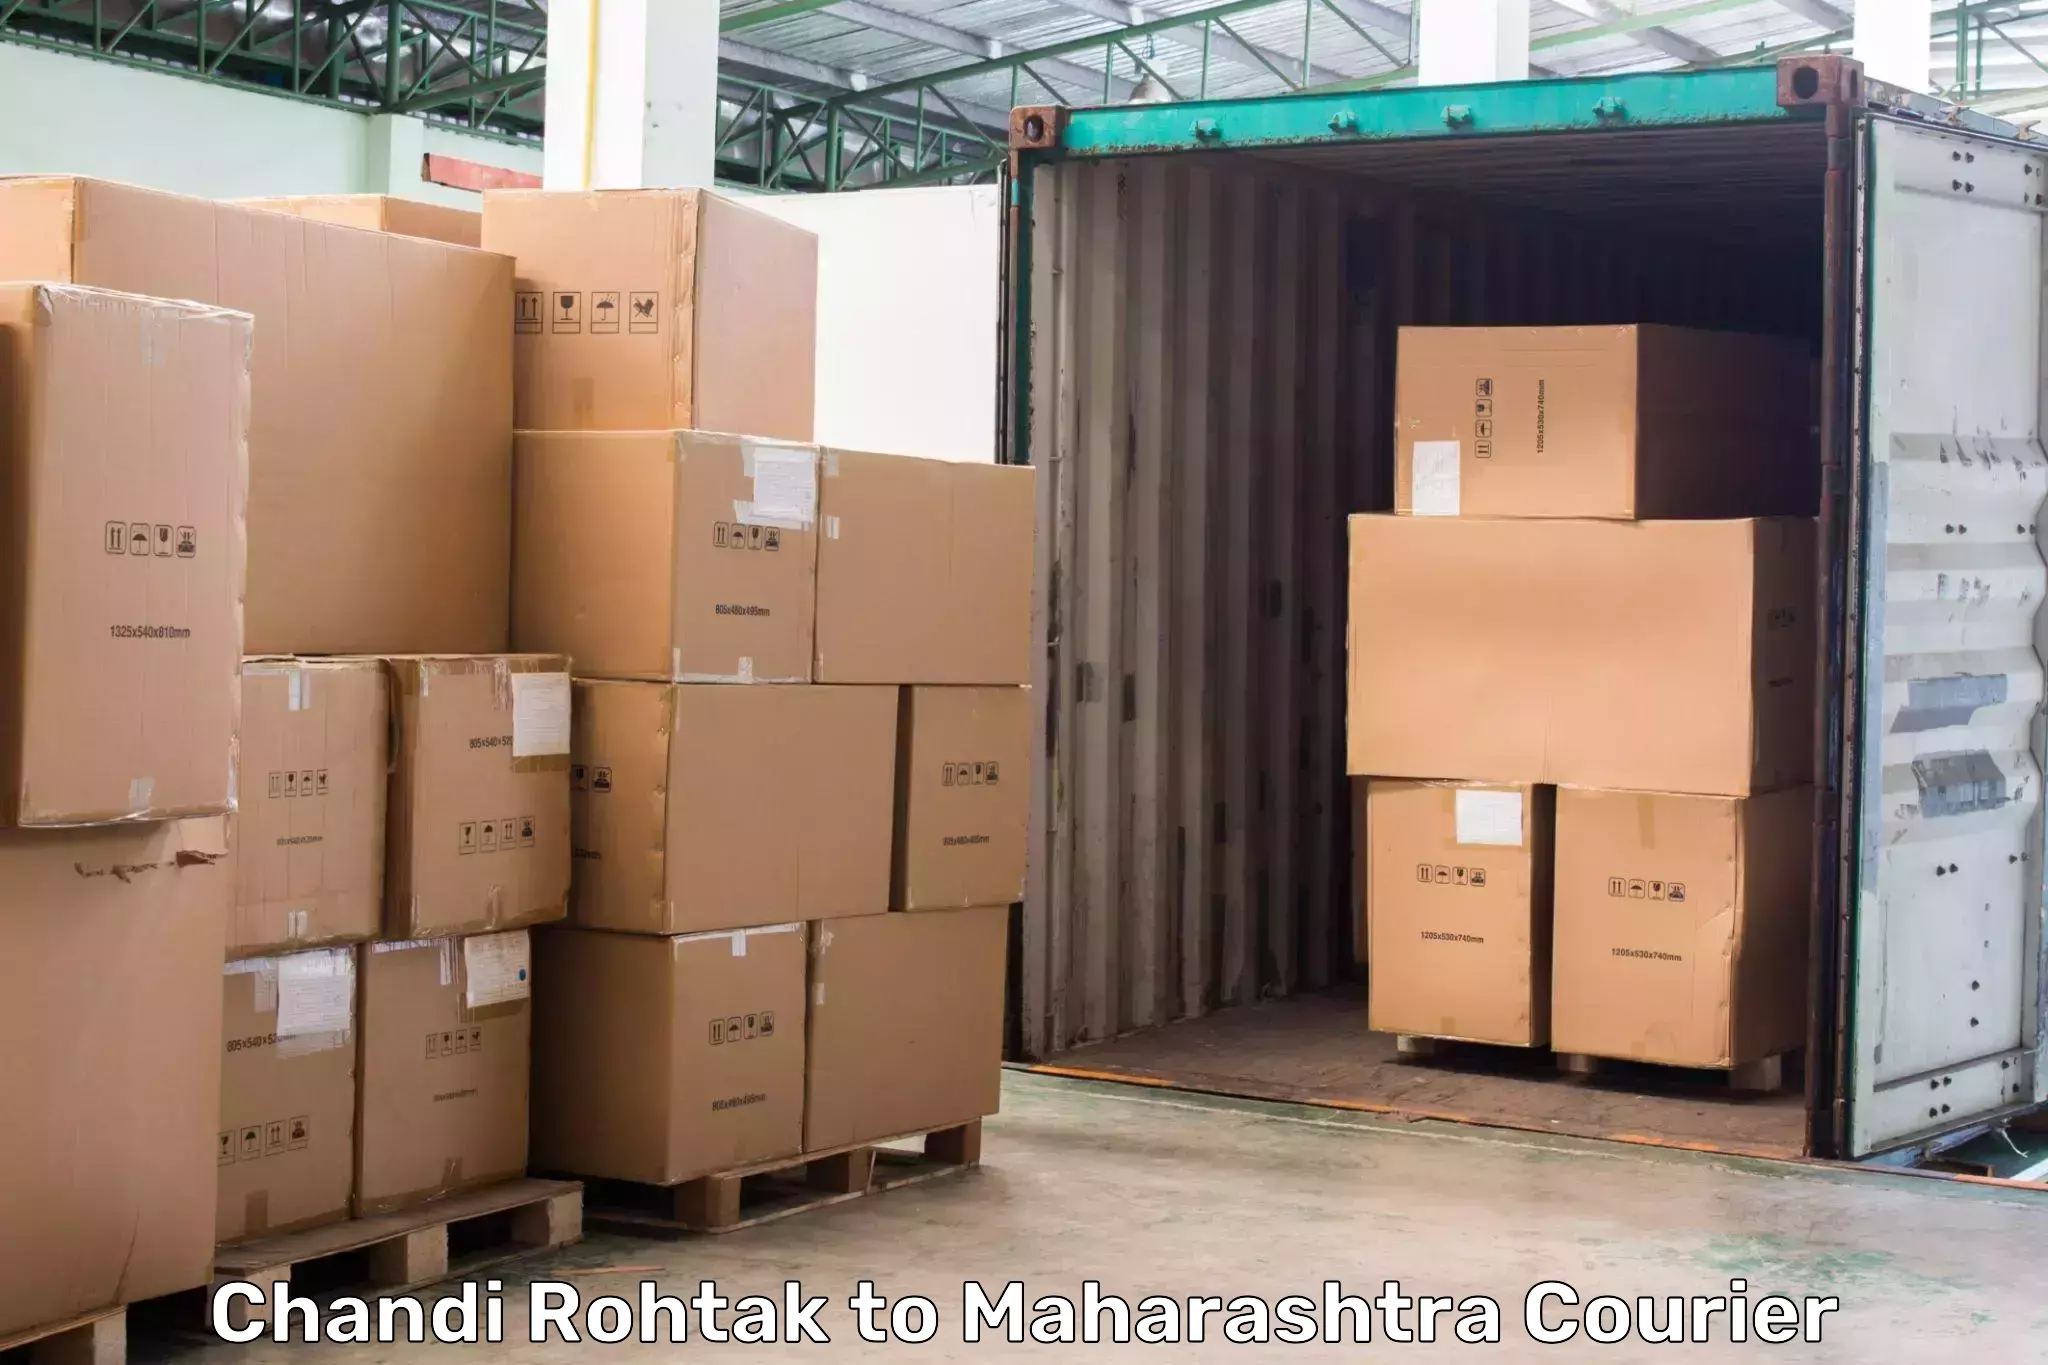 Express delivery capabilities Chandi Rohtak to Warud